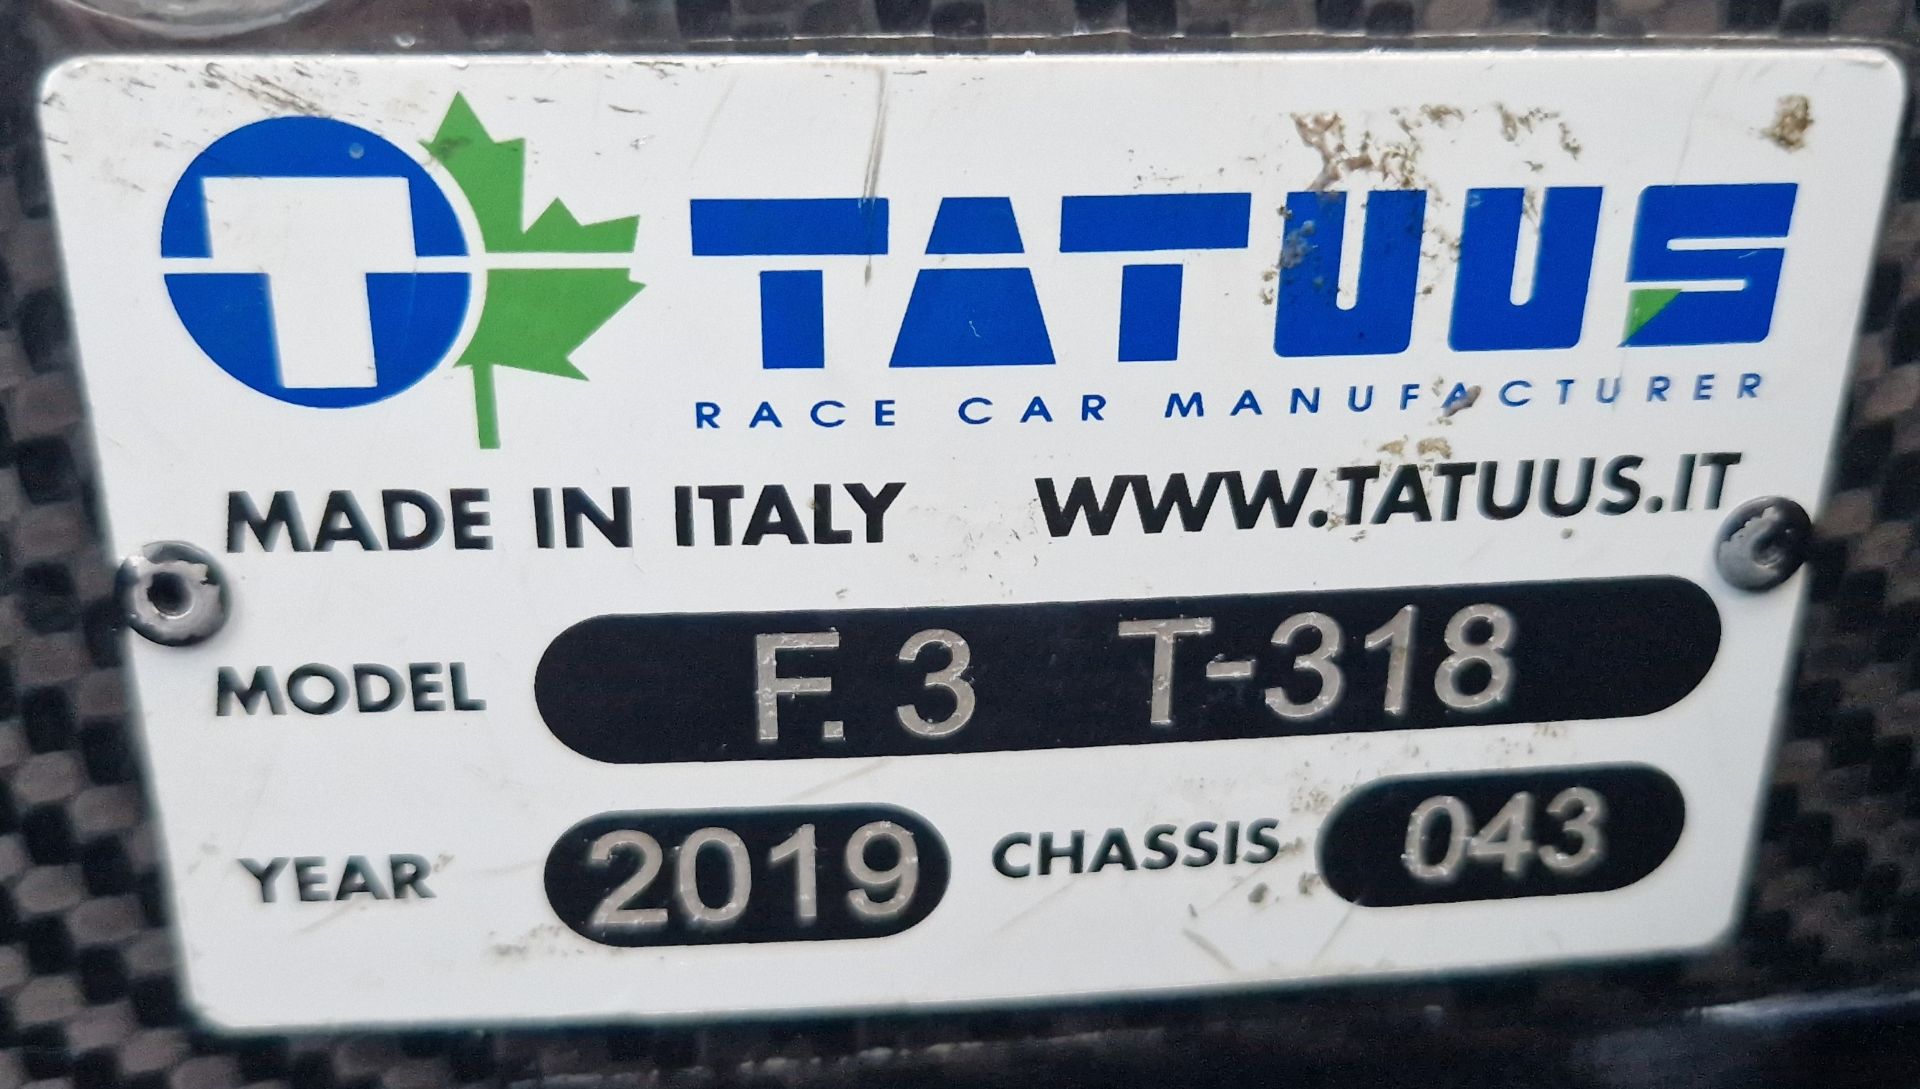 One TATUUS F3 T-318 Alfa Romeo Race Car Chassis No. 043 (2019) Finished in Bristol Street Motors - Image 6 of 10